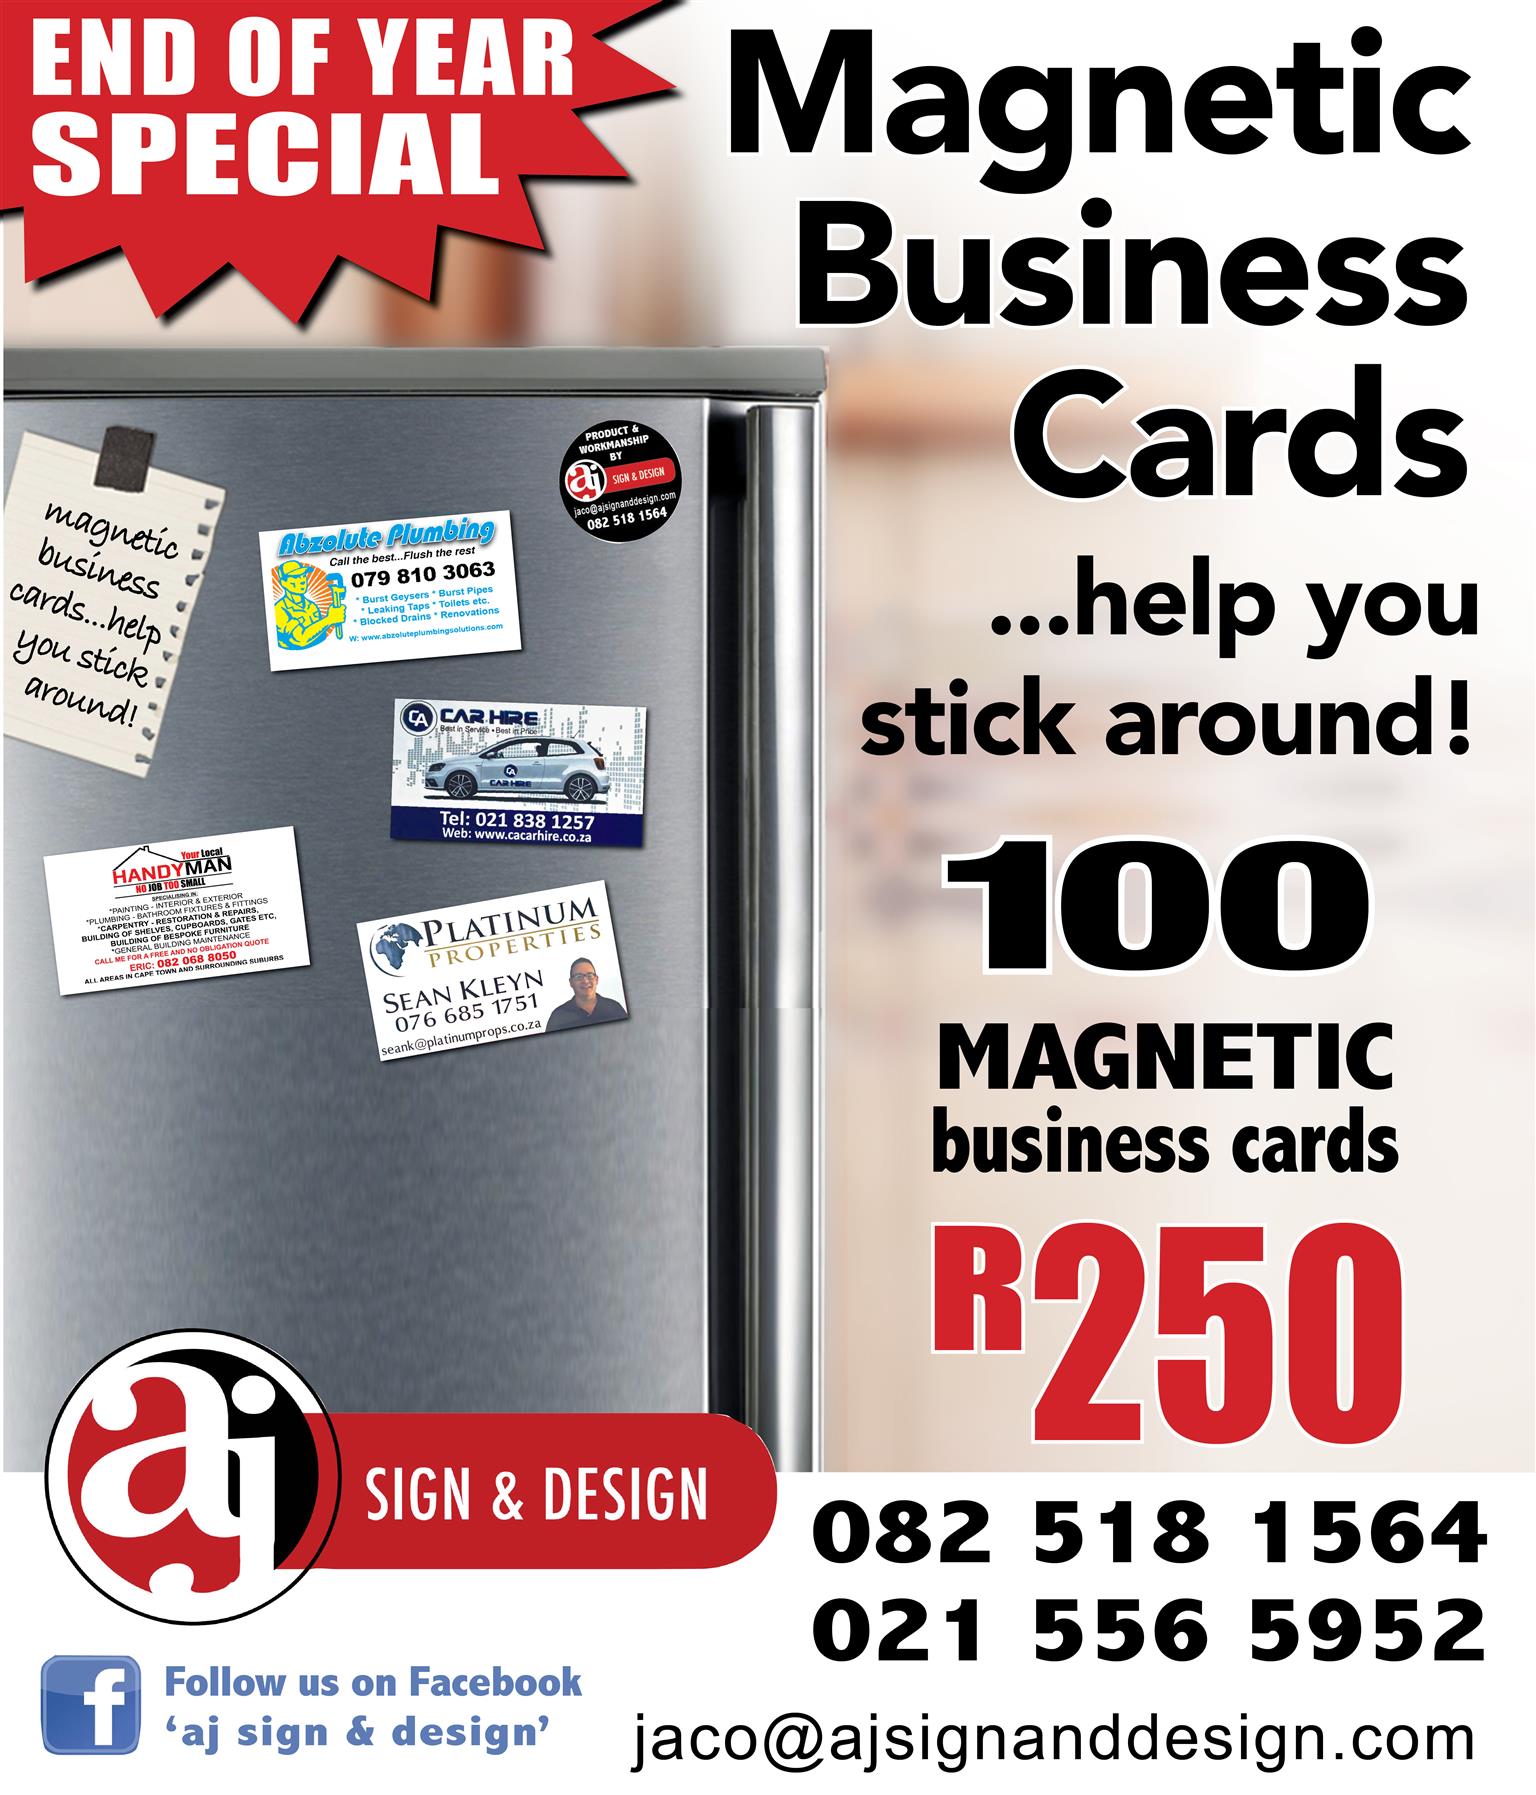 End of Year Special on MAGNETIC BUSINESS CARDS